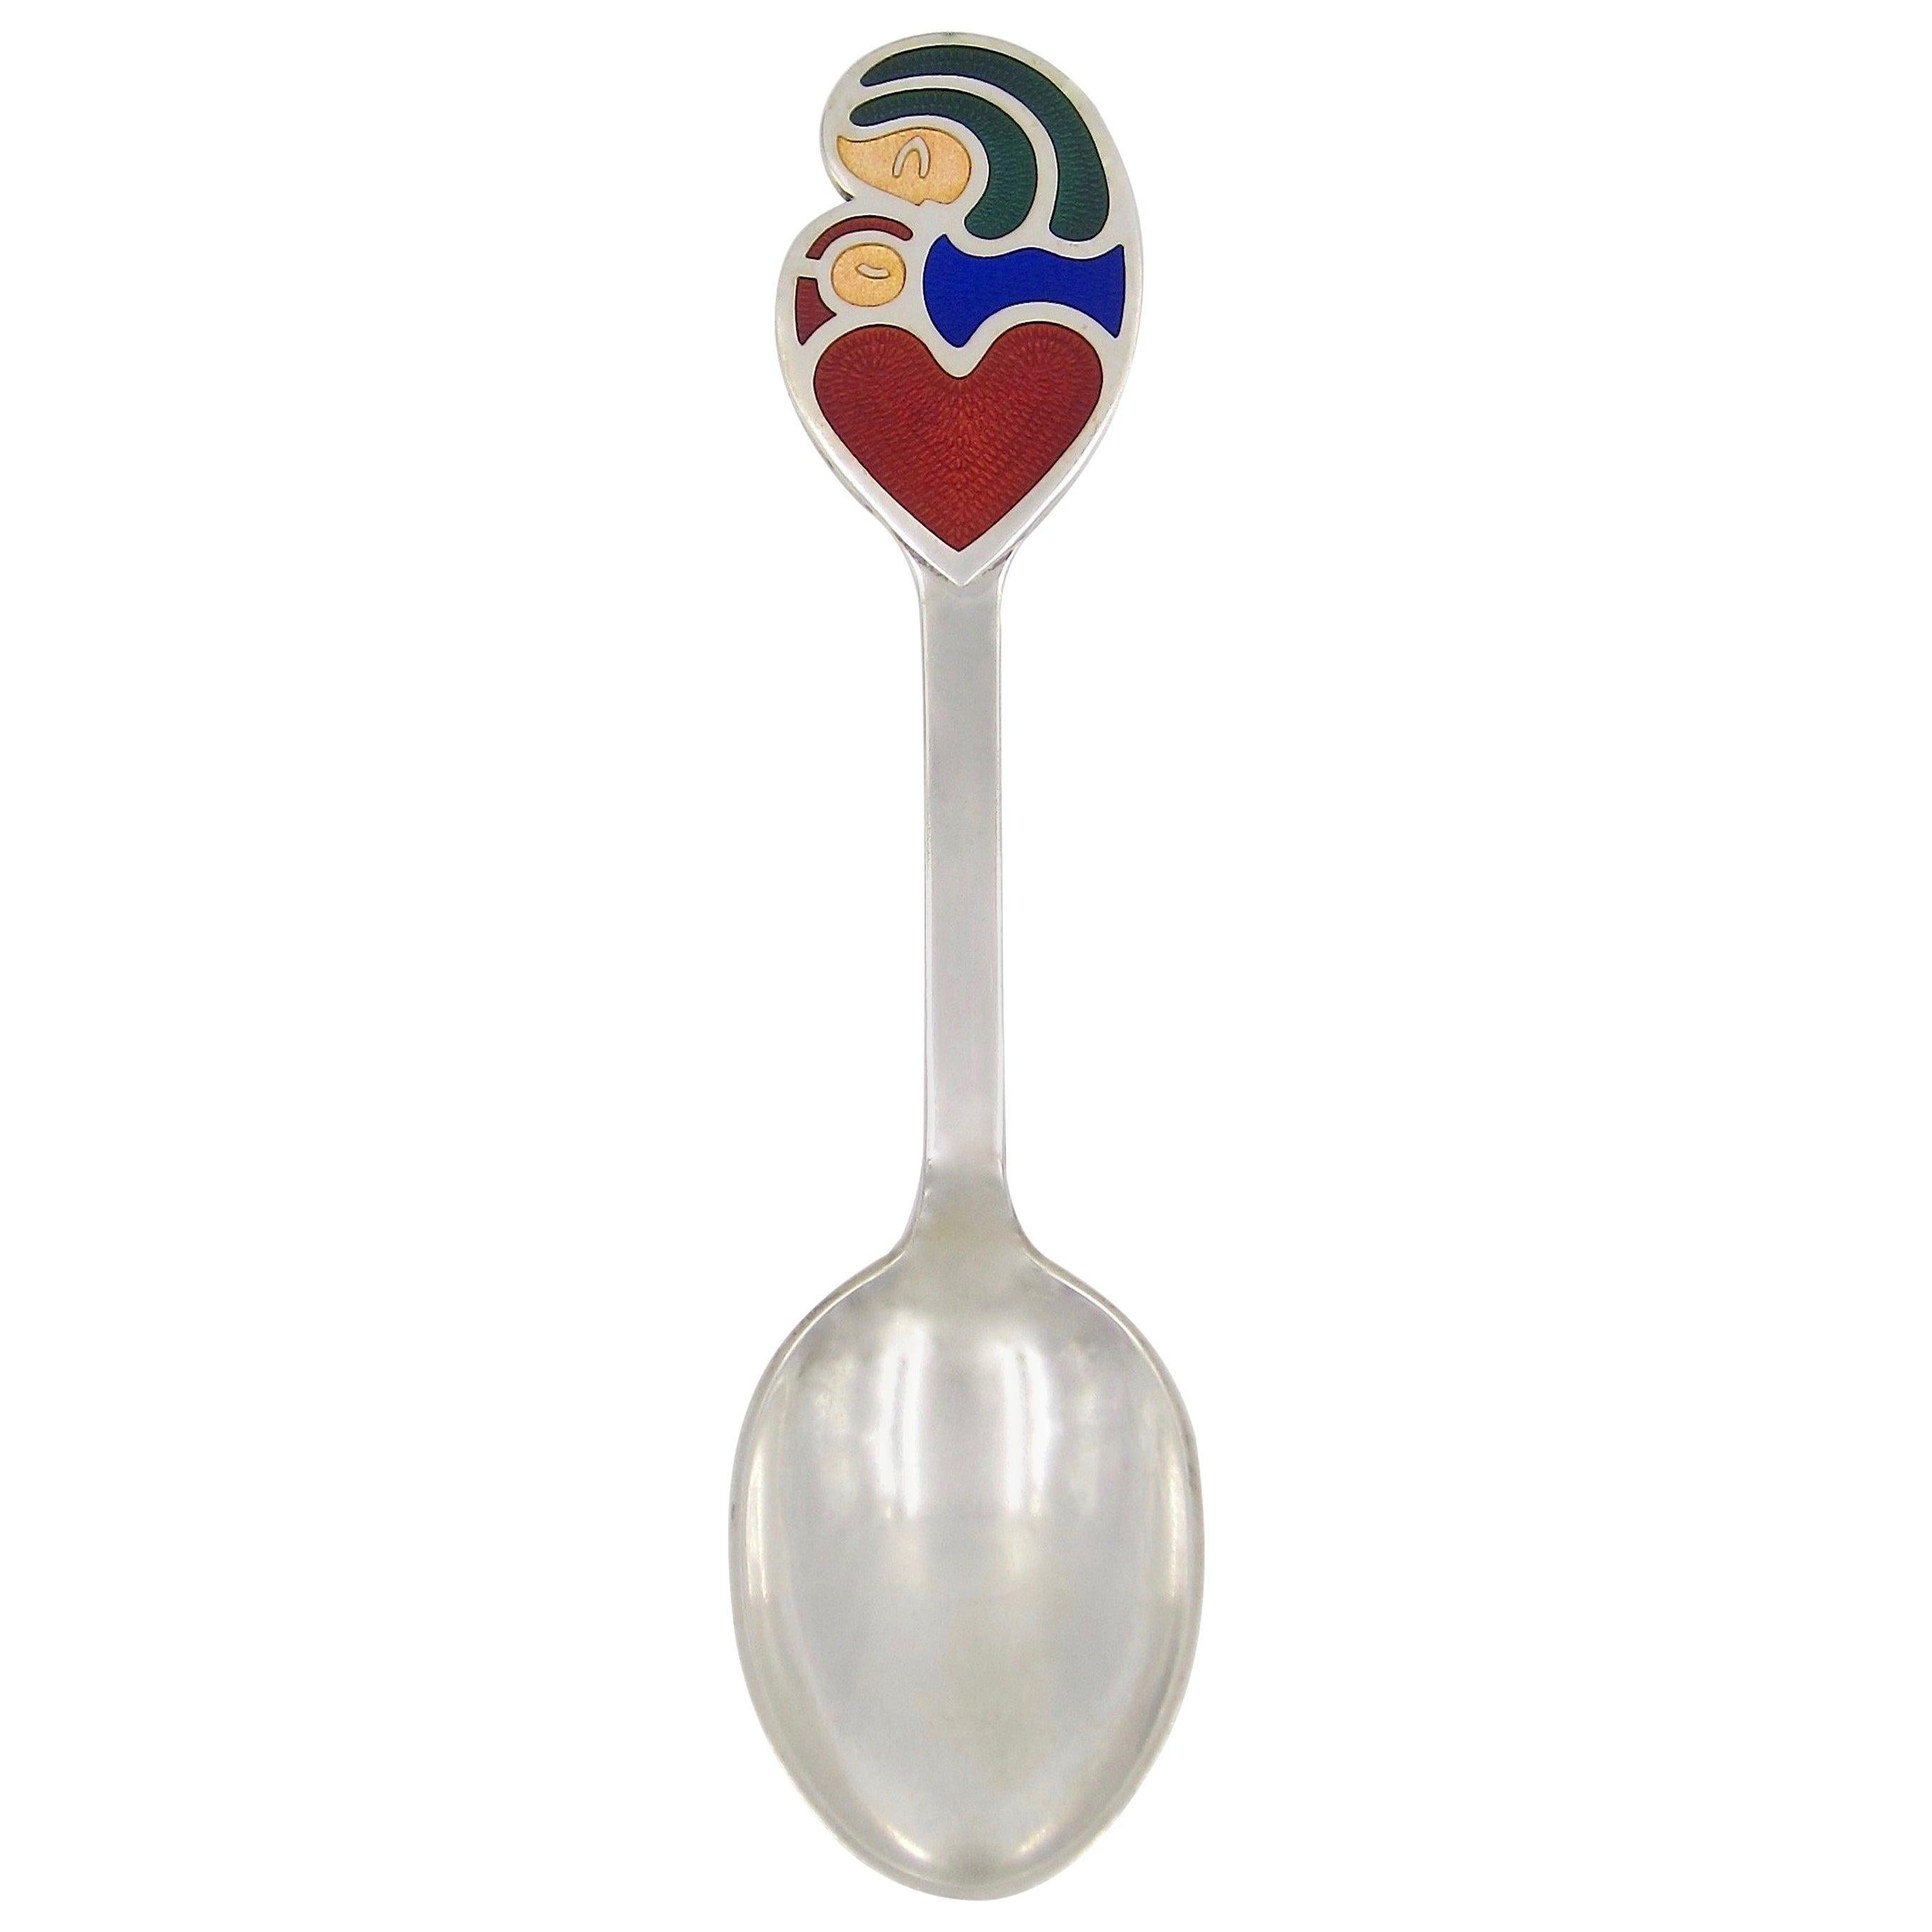 Please note-  tray from Cordial set in PC Consolidated Listing-Listing 1 will be shipped in this package

1934 Holy Night Anton Michelsen Sterling Silver and Enamel Christmas Fork , 6.38 x 63 ,f_20914302 , Price: $150
1972 Bjorn Wiinblad for Anton